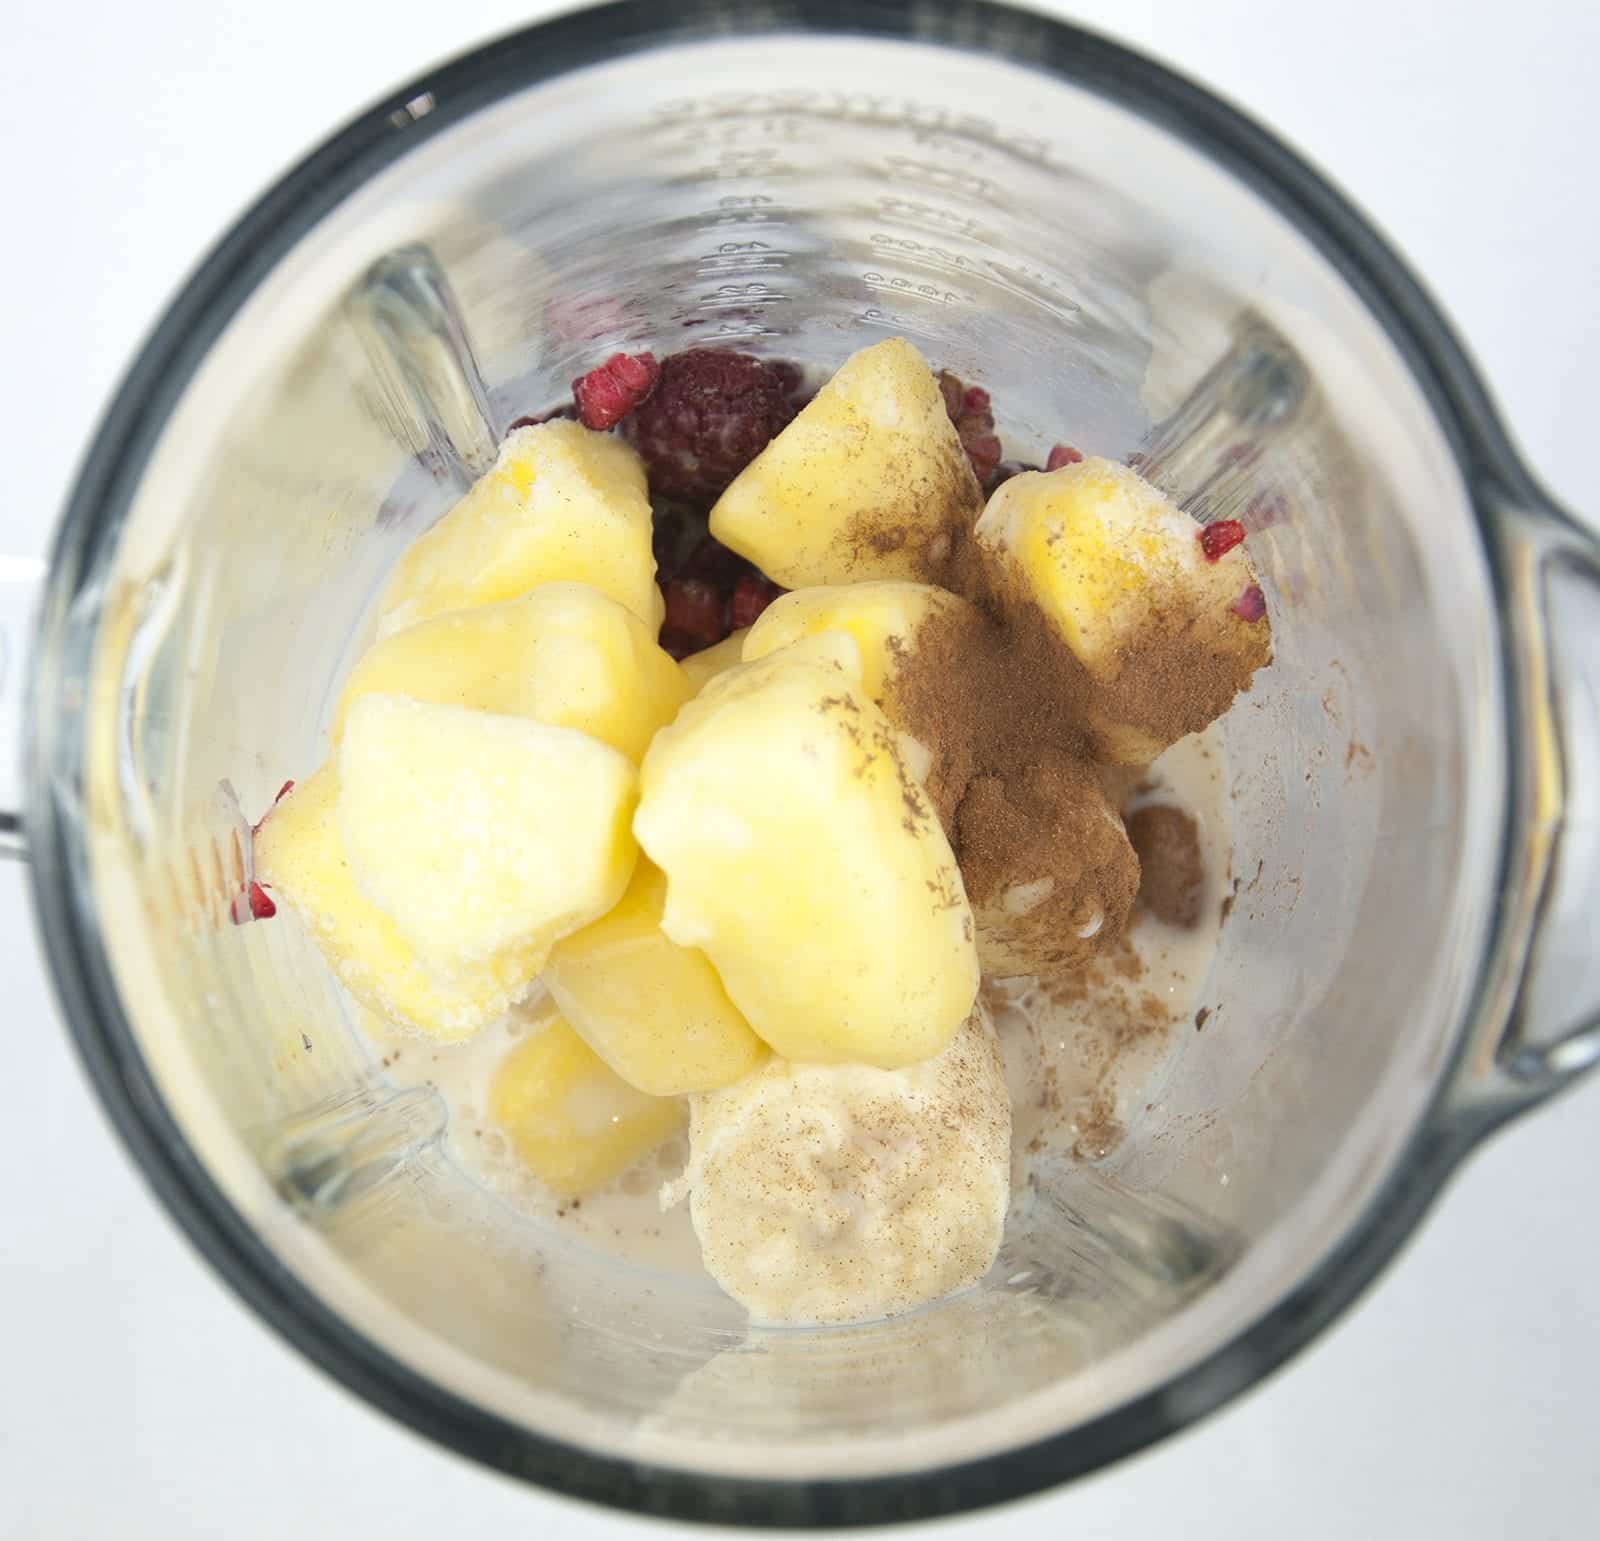 Raspberry and pineapple smoothie, with a little surprise! Banana to add texture and a wonderful hint of cinnamon to taste. A great start to the day. Yum! | theyumyumclub.com